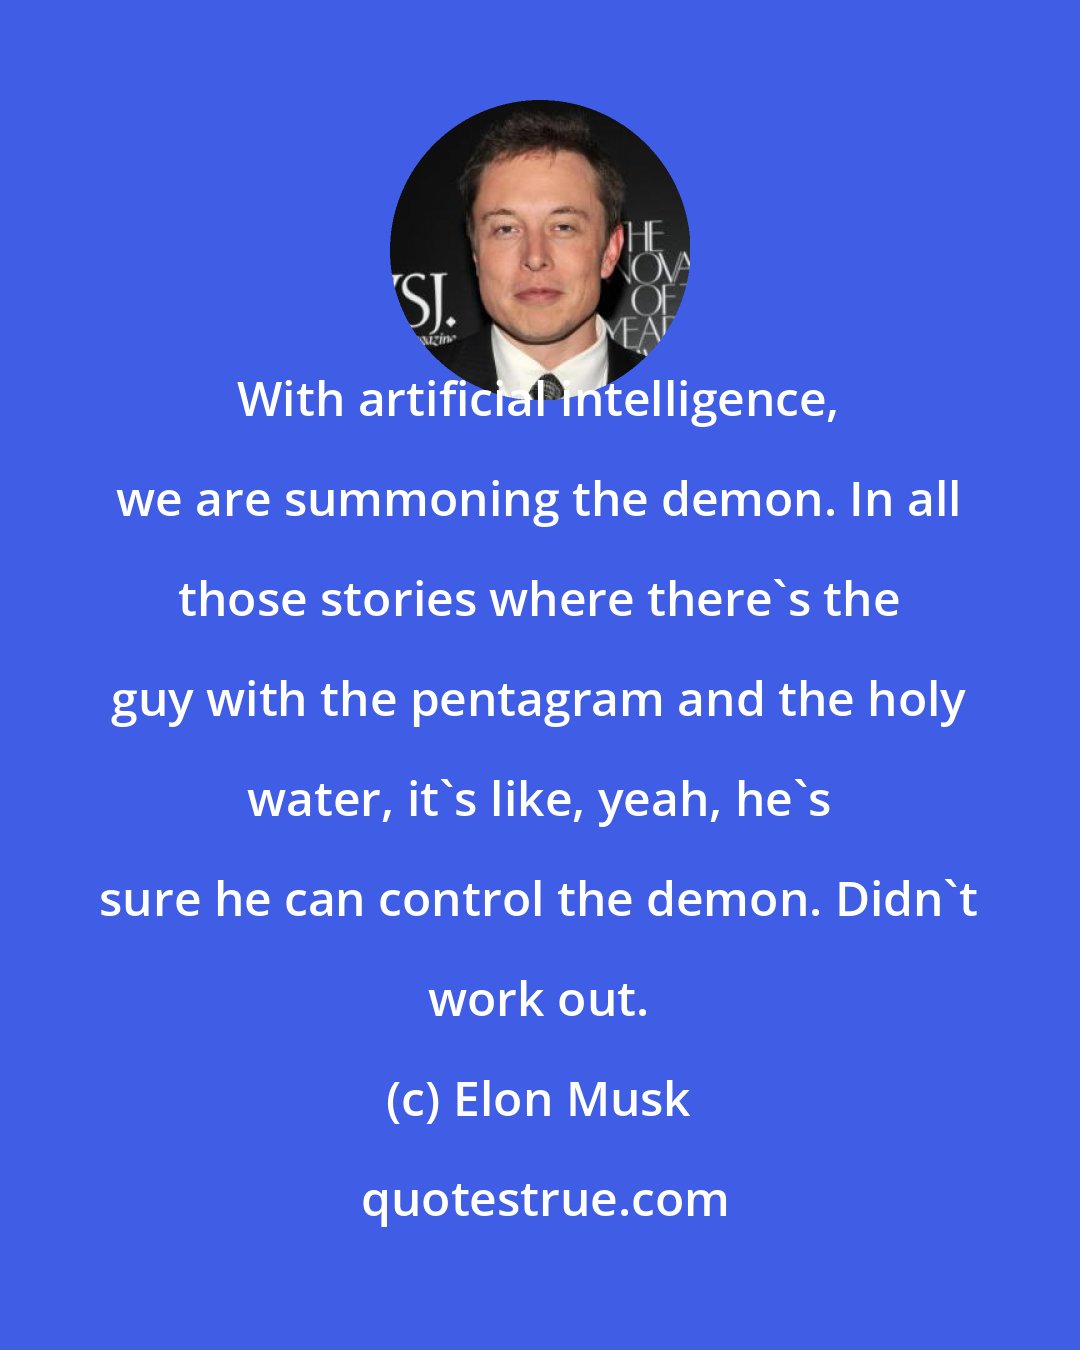 Elon Musk: With artificial intelligence, we are summoning the demon. In all those stories where there's the guy with the pentagram and the holy water, it's like, yeah, he's sure he can control the demon. Didn't work out.